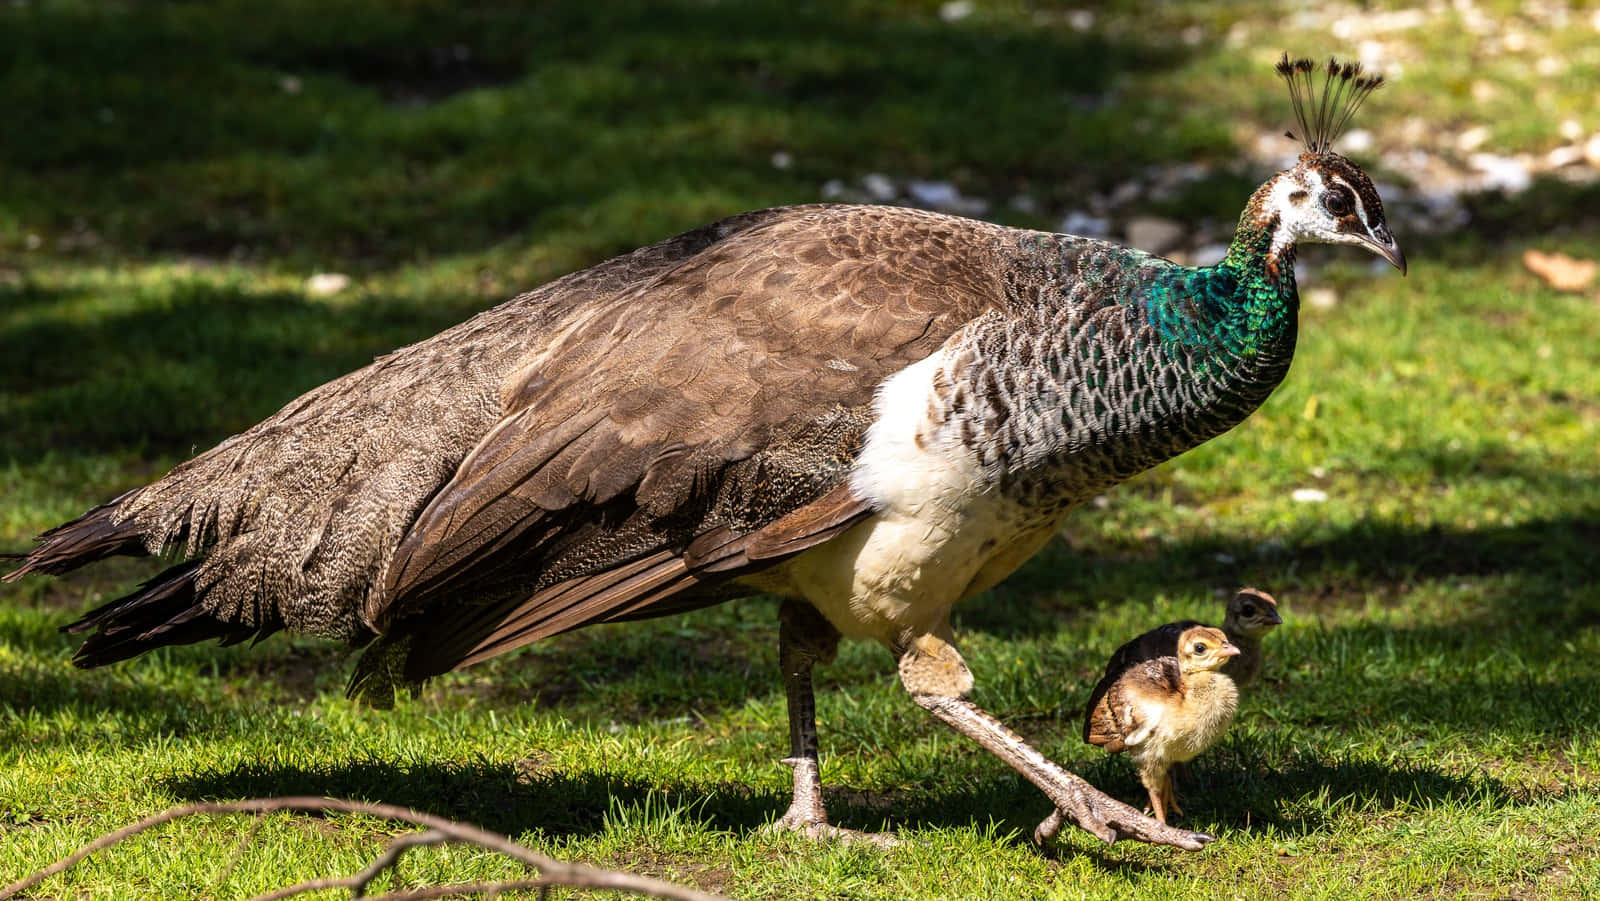 Majestic Beauty of the Peahen